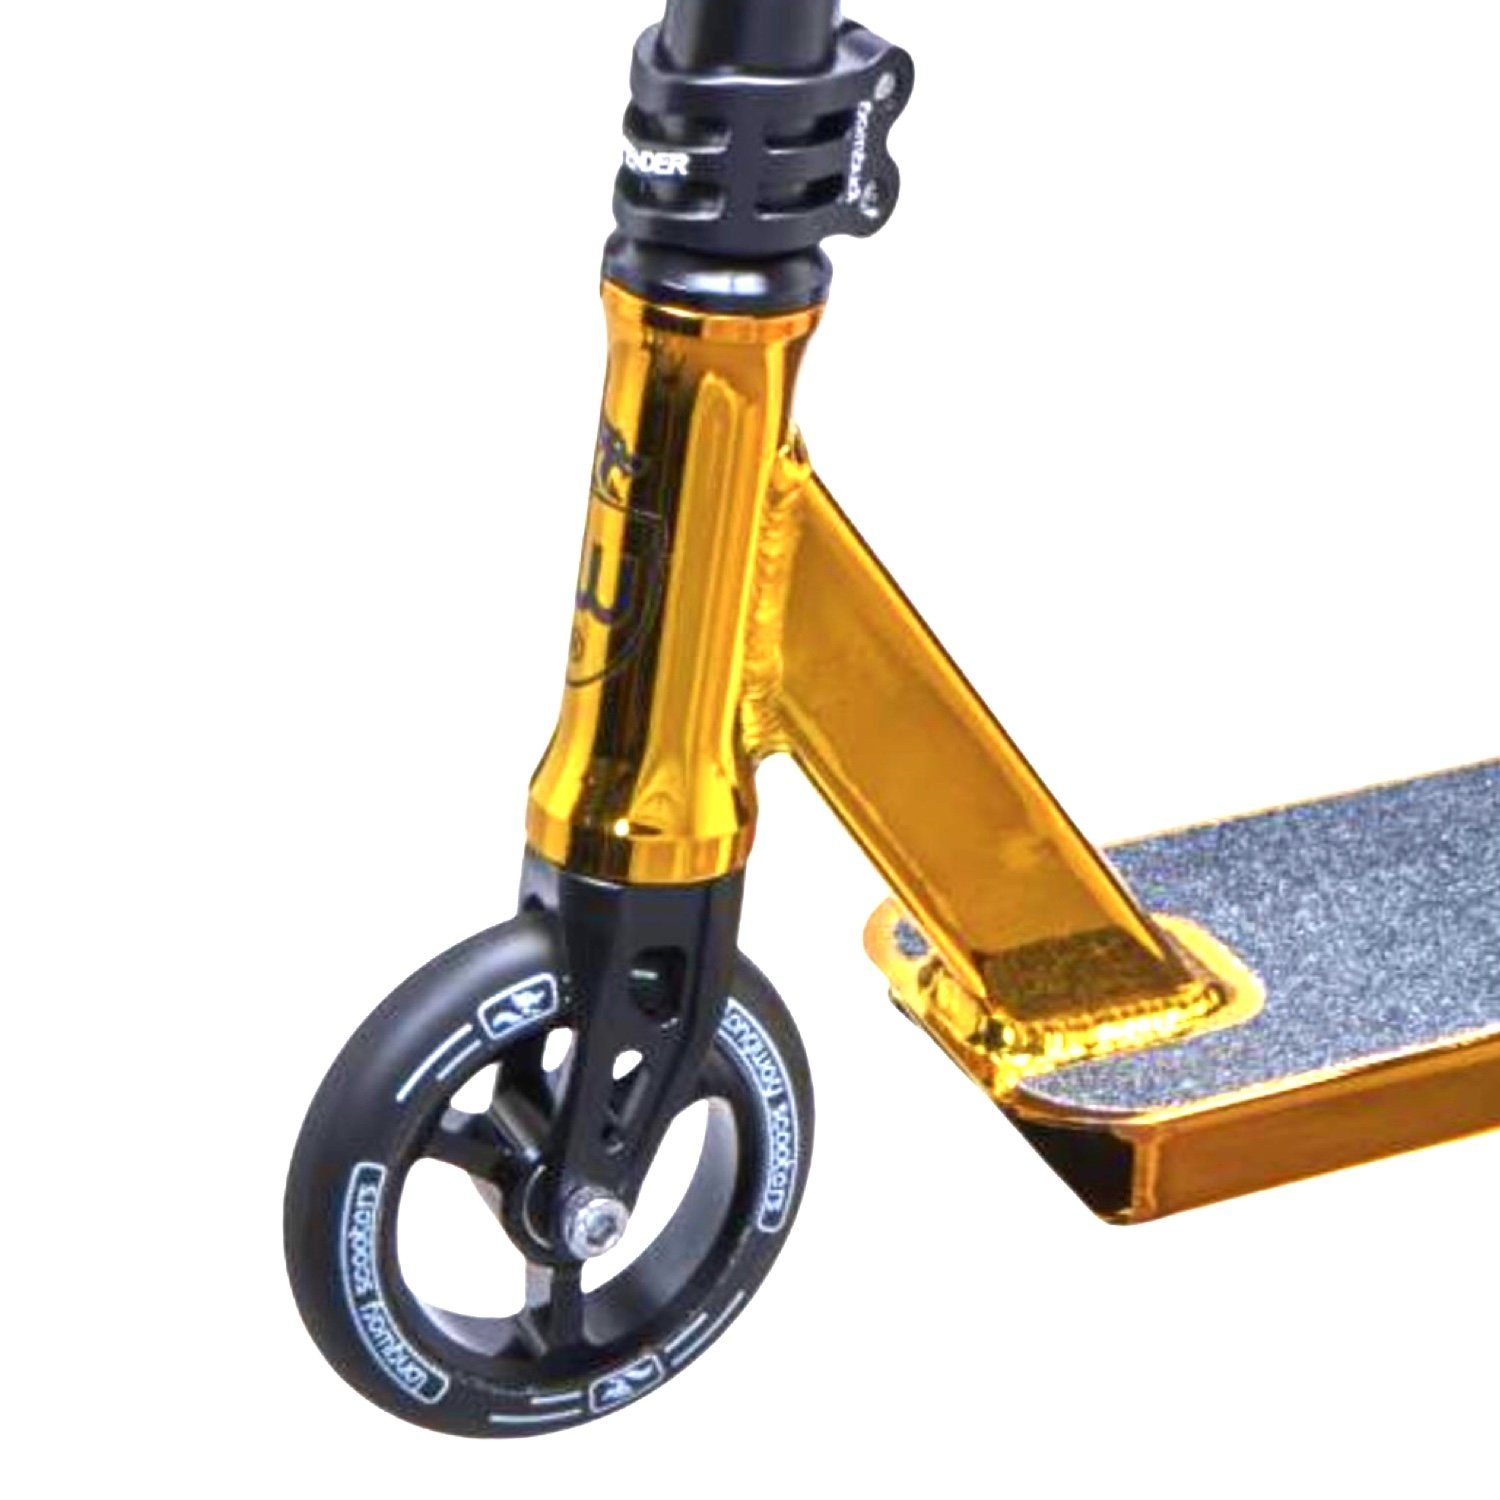 Metro Topaz H=84cm Scooters Longway Stunt-Scooter Shift Longway Stuntscooter